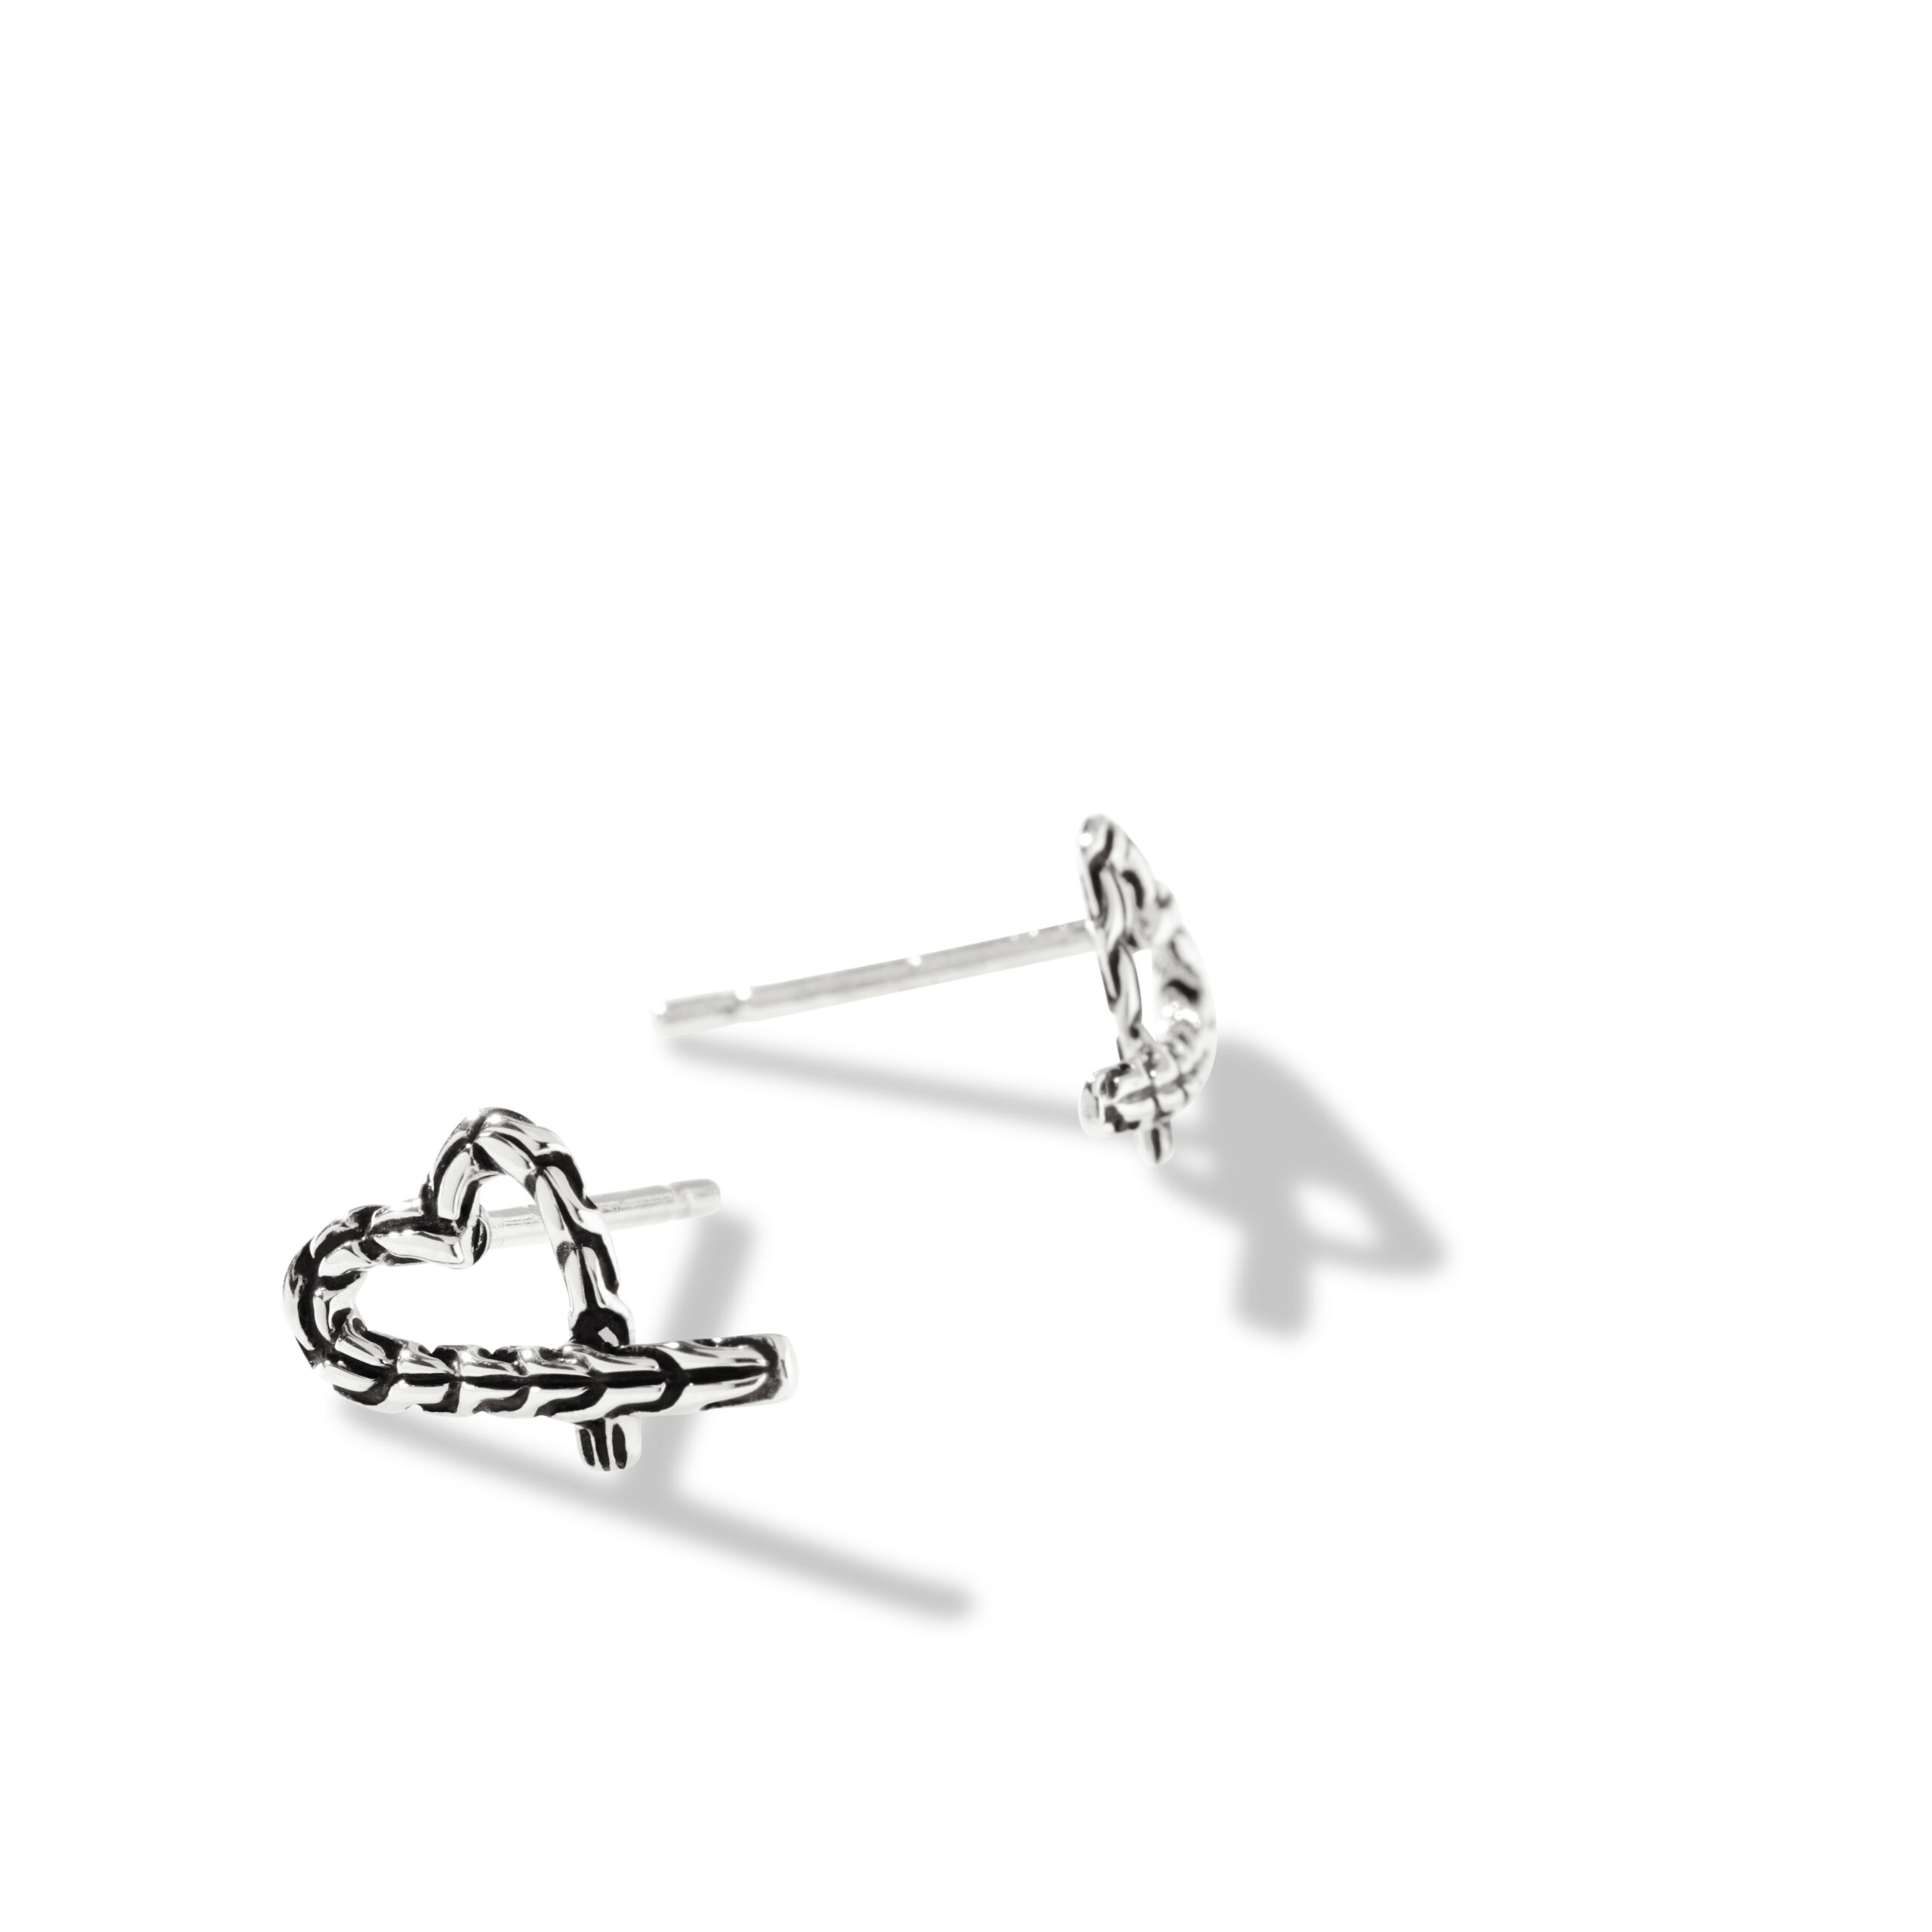 This pair of earrings by John Hardy is crafted from sterling silver and features open hearts.